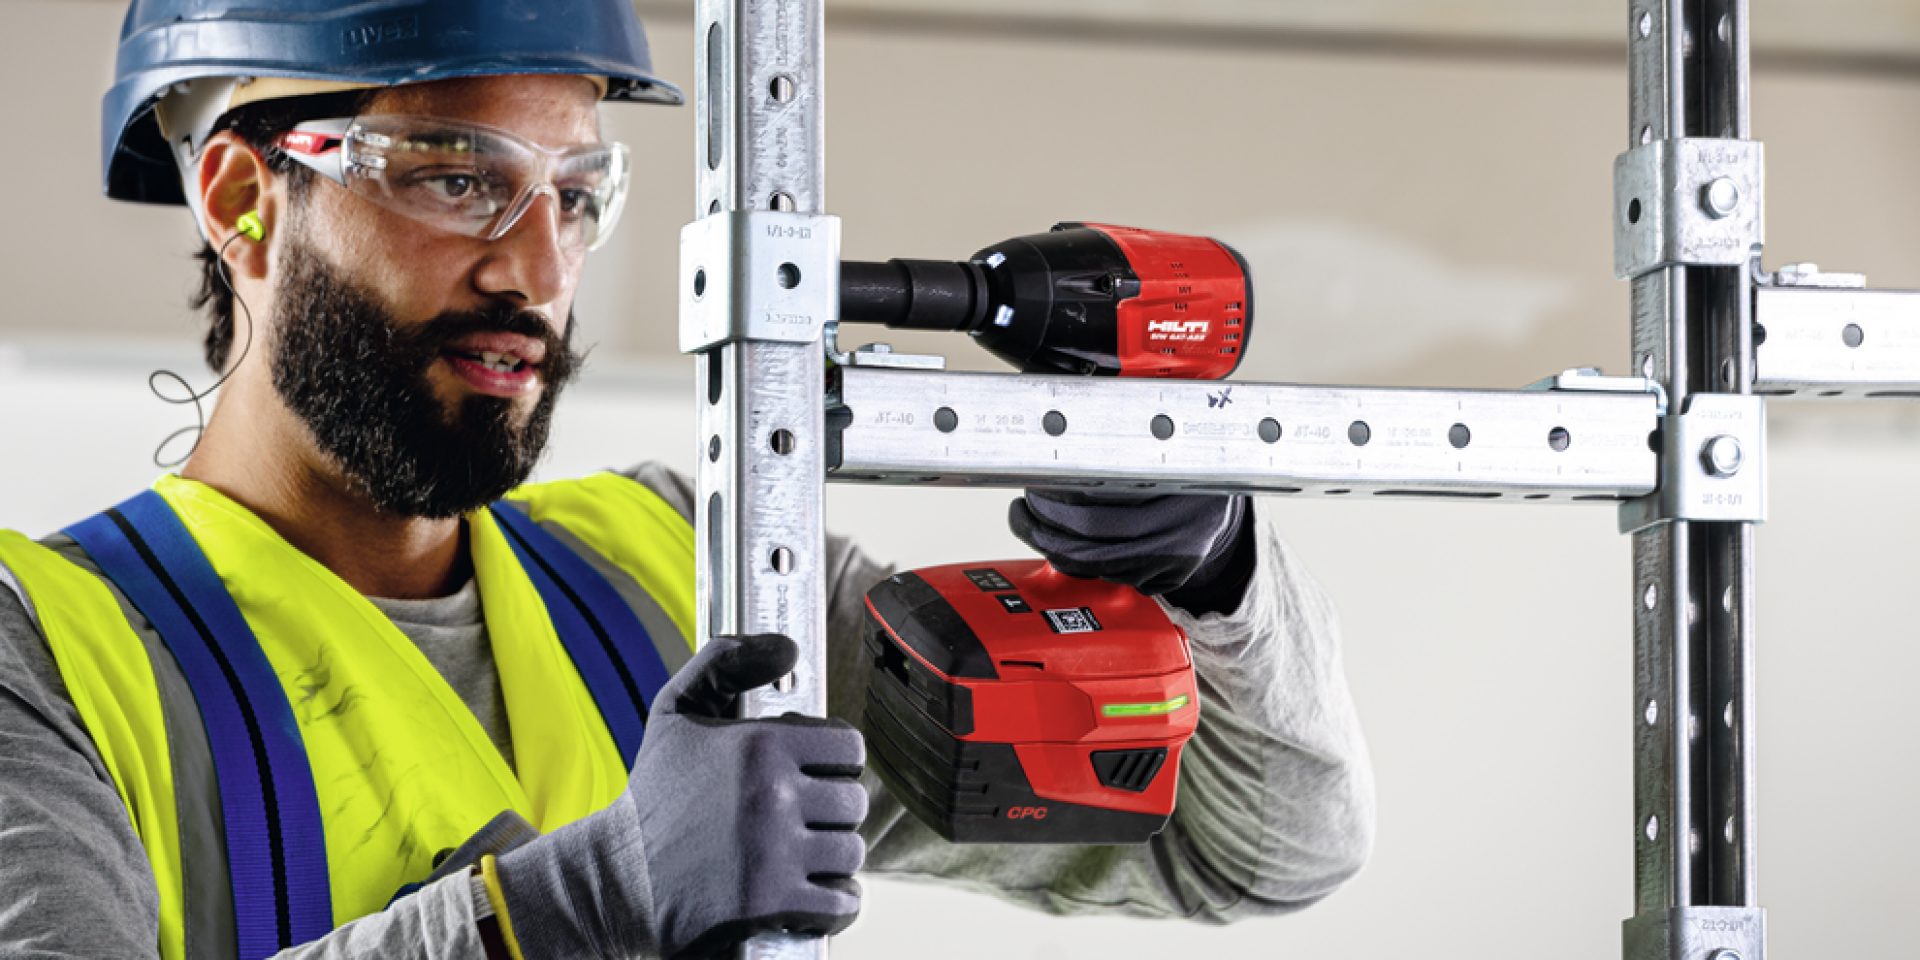 Product Overview - Hilti Corporation